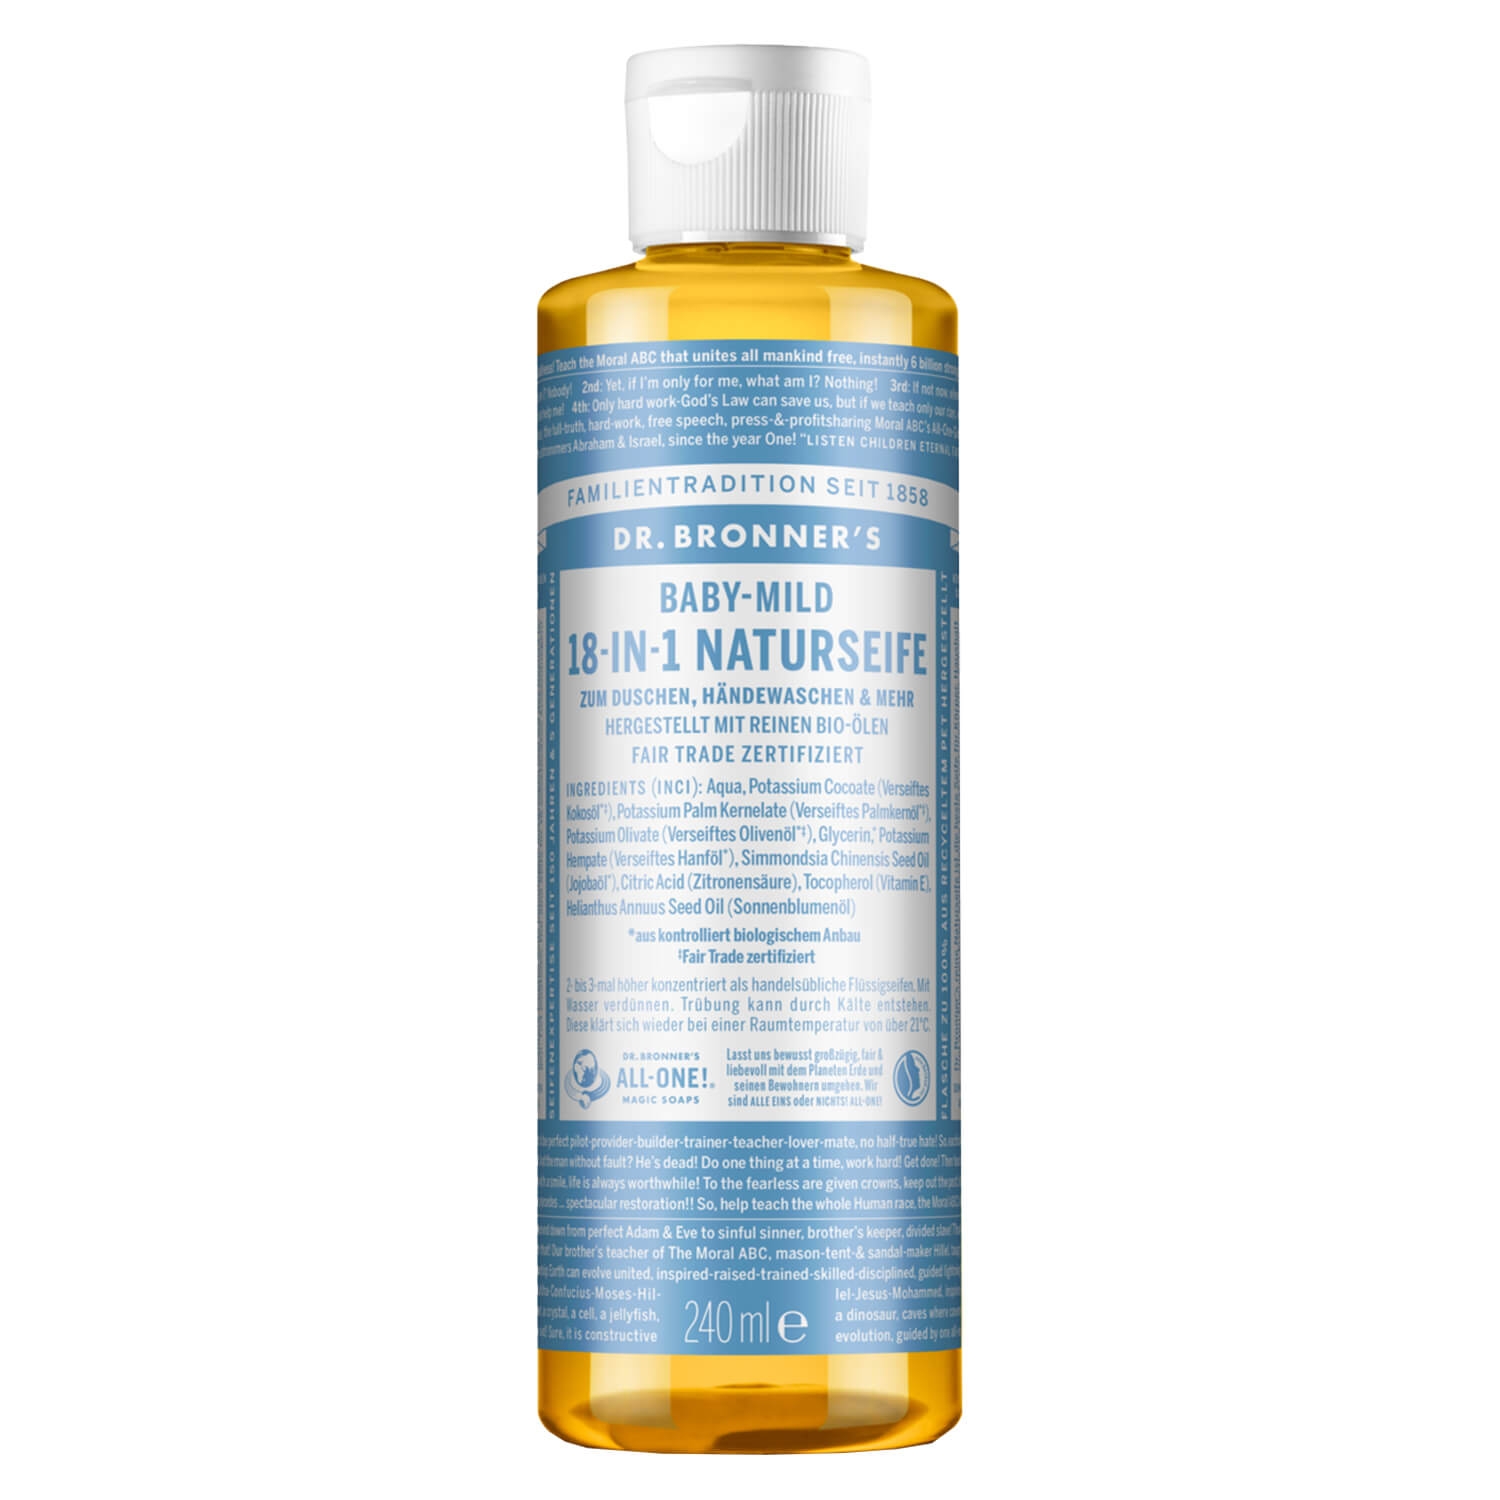 Product image from DR. BRONNER'S - 18-IN-1 Flüssigseife Baby Mild